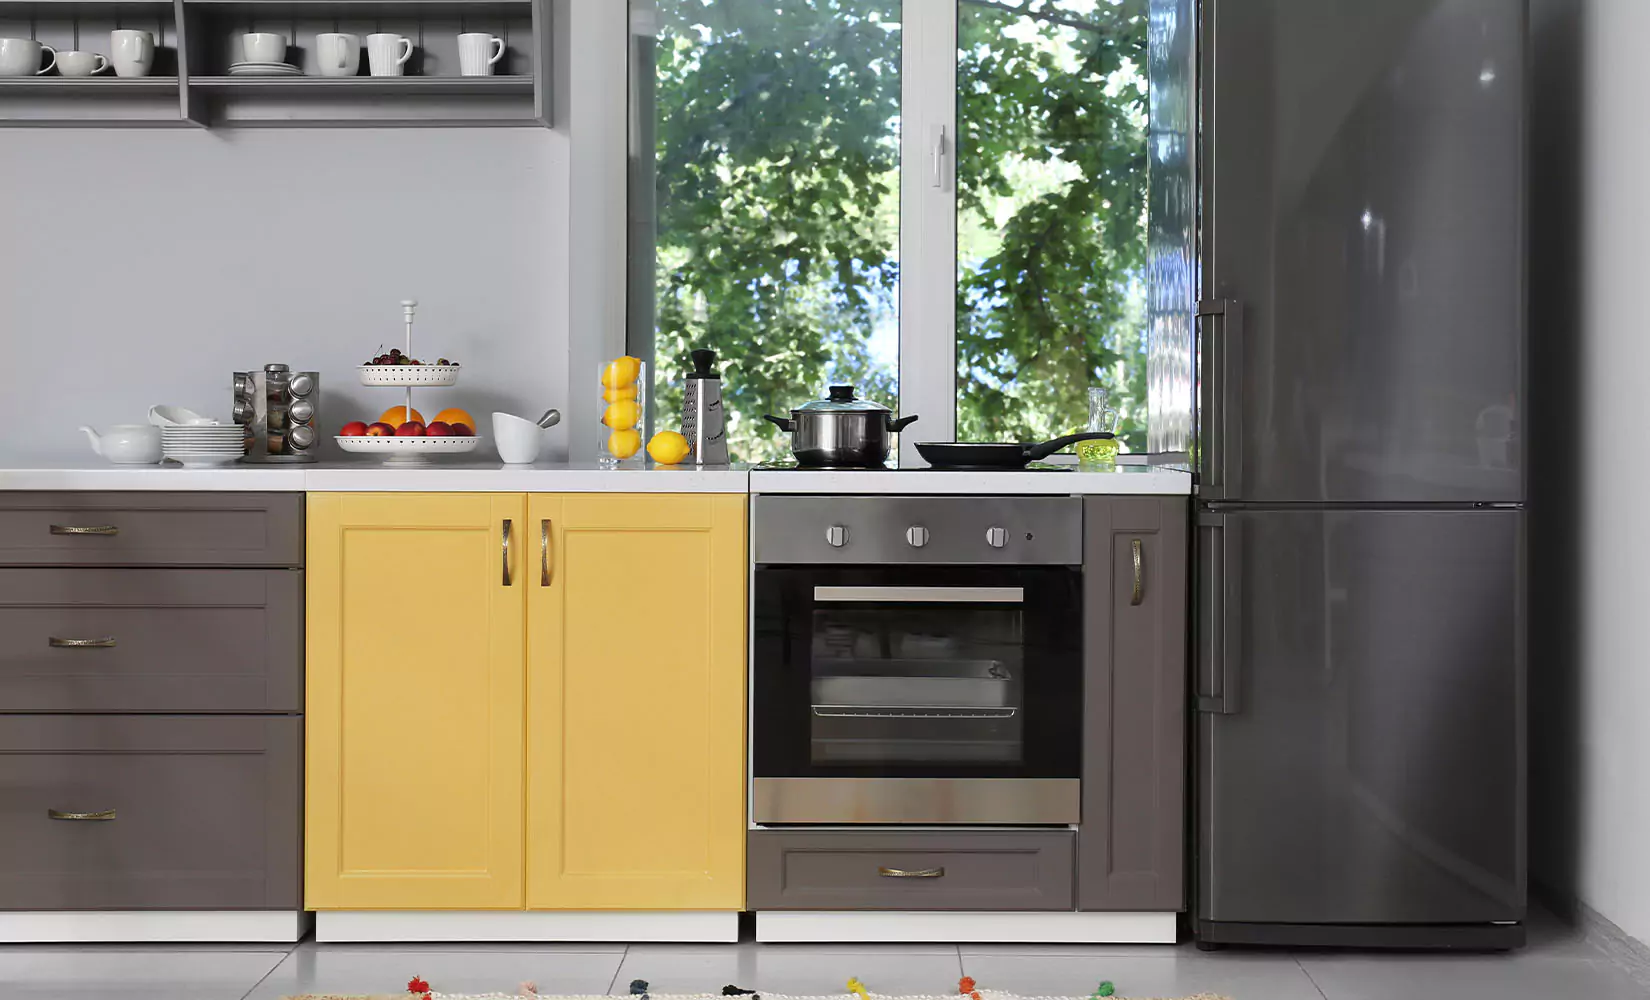 Kitchen with gray cabinets and appliances and one yellow cabinet.